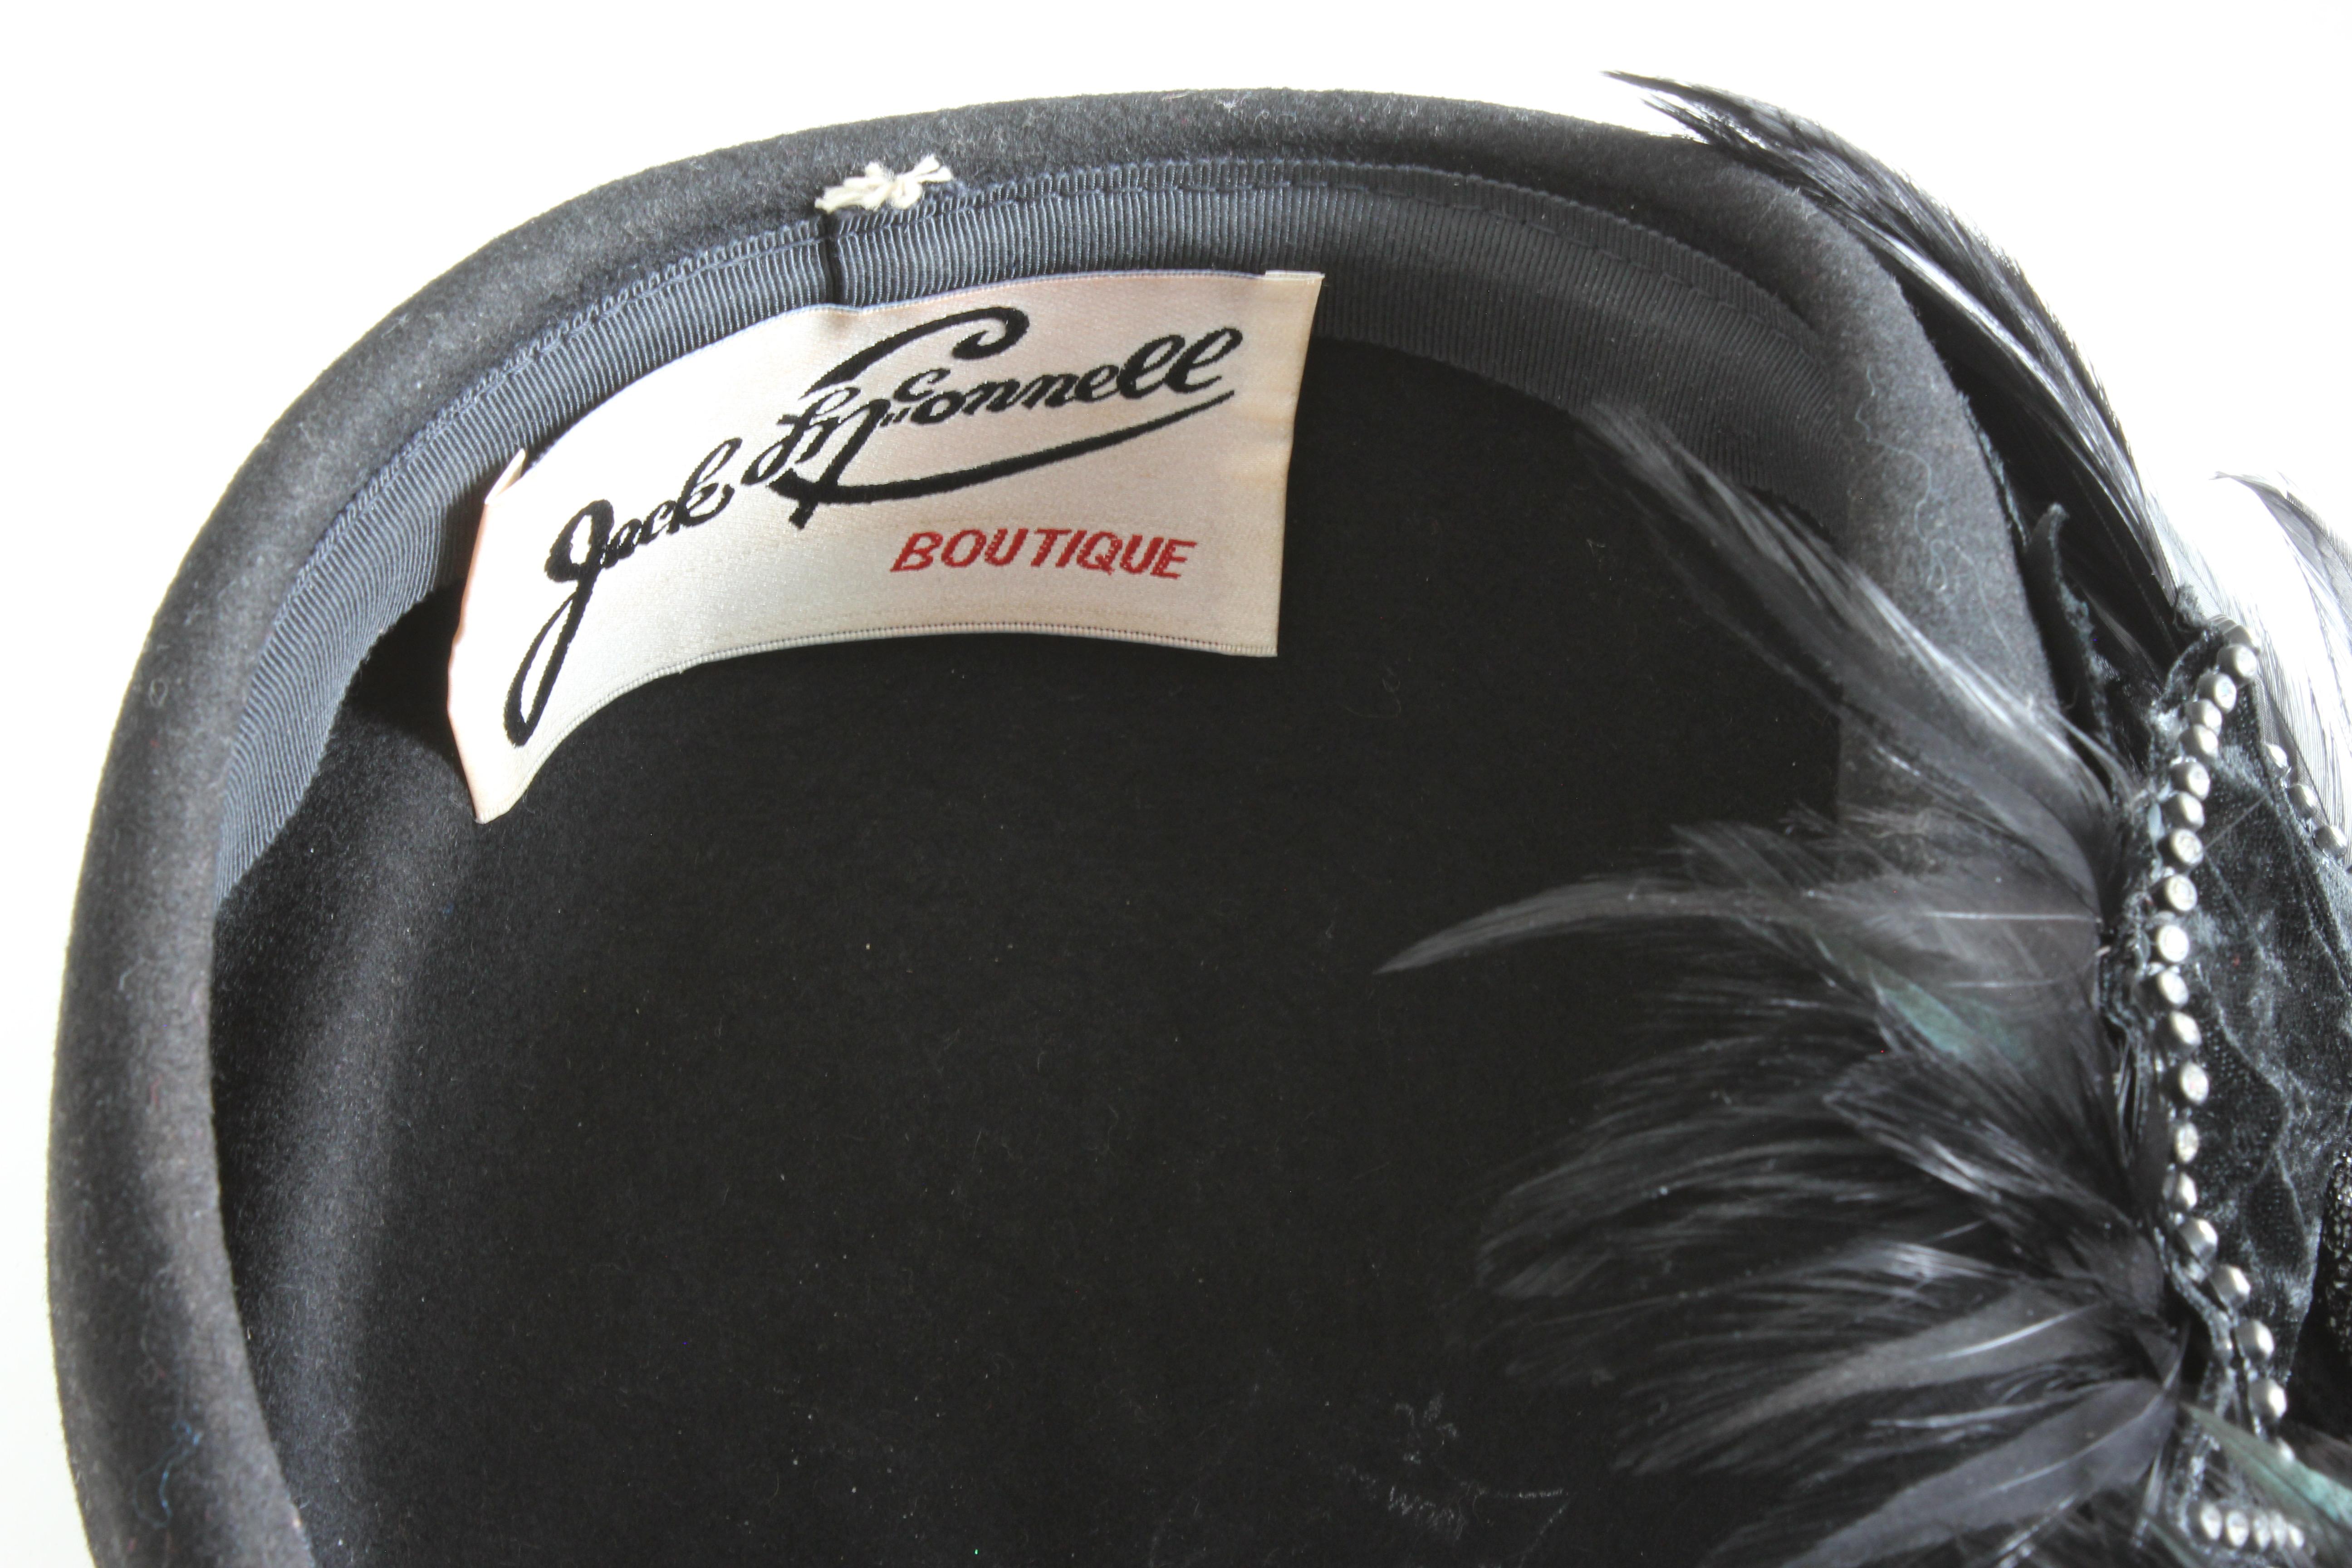 Jack McConnell Boutique Black Wool Clochette Hat with Feathers 1960s Bollman Hat For Sale 7